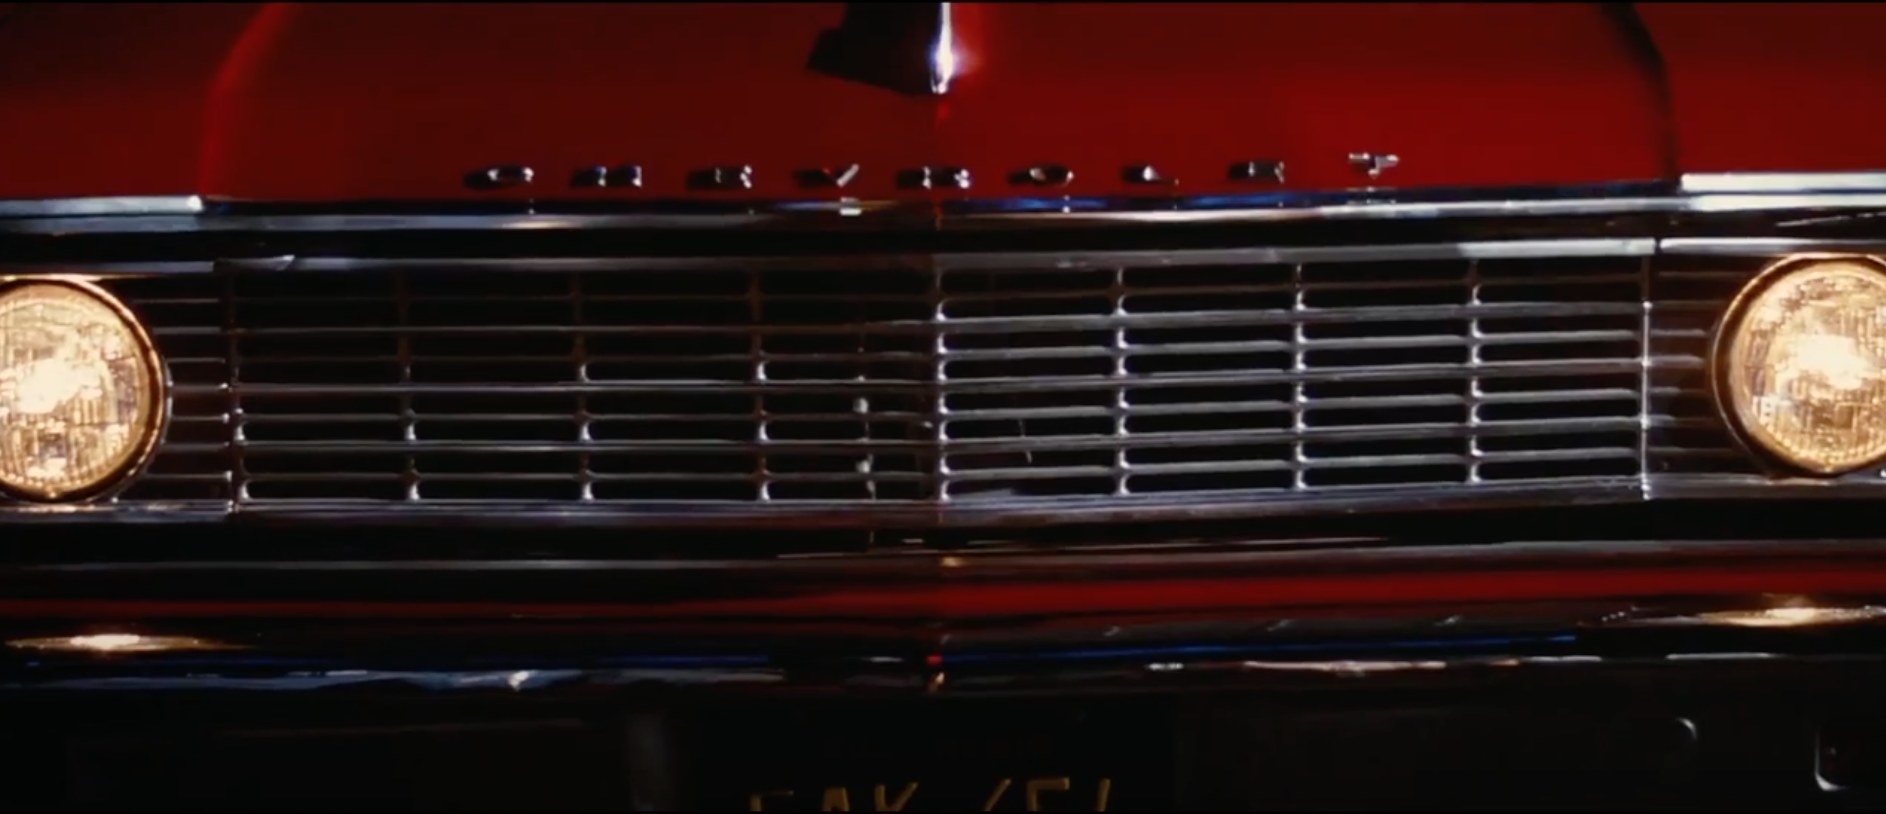 red chevy car and grill in Pulp Fiction